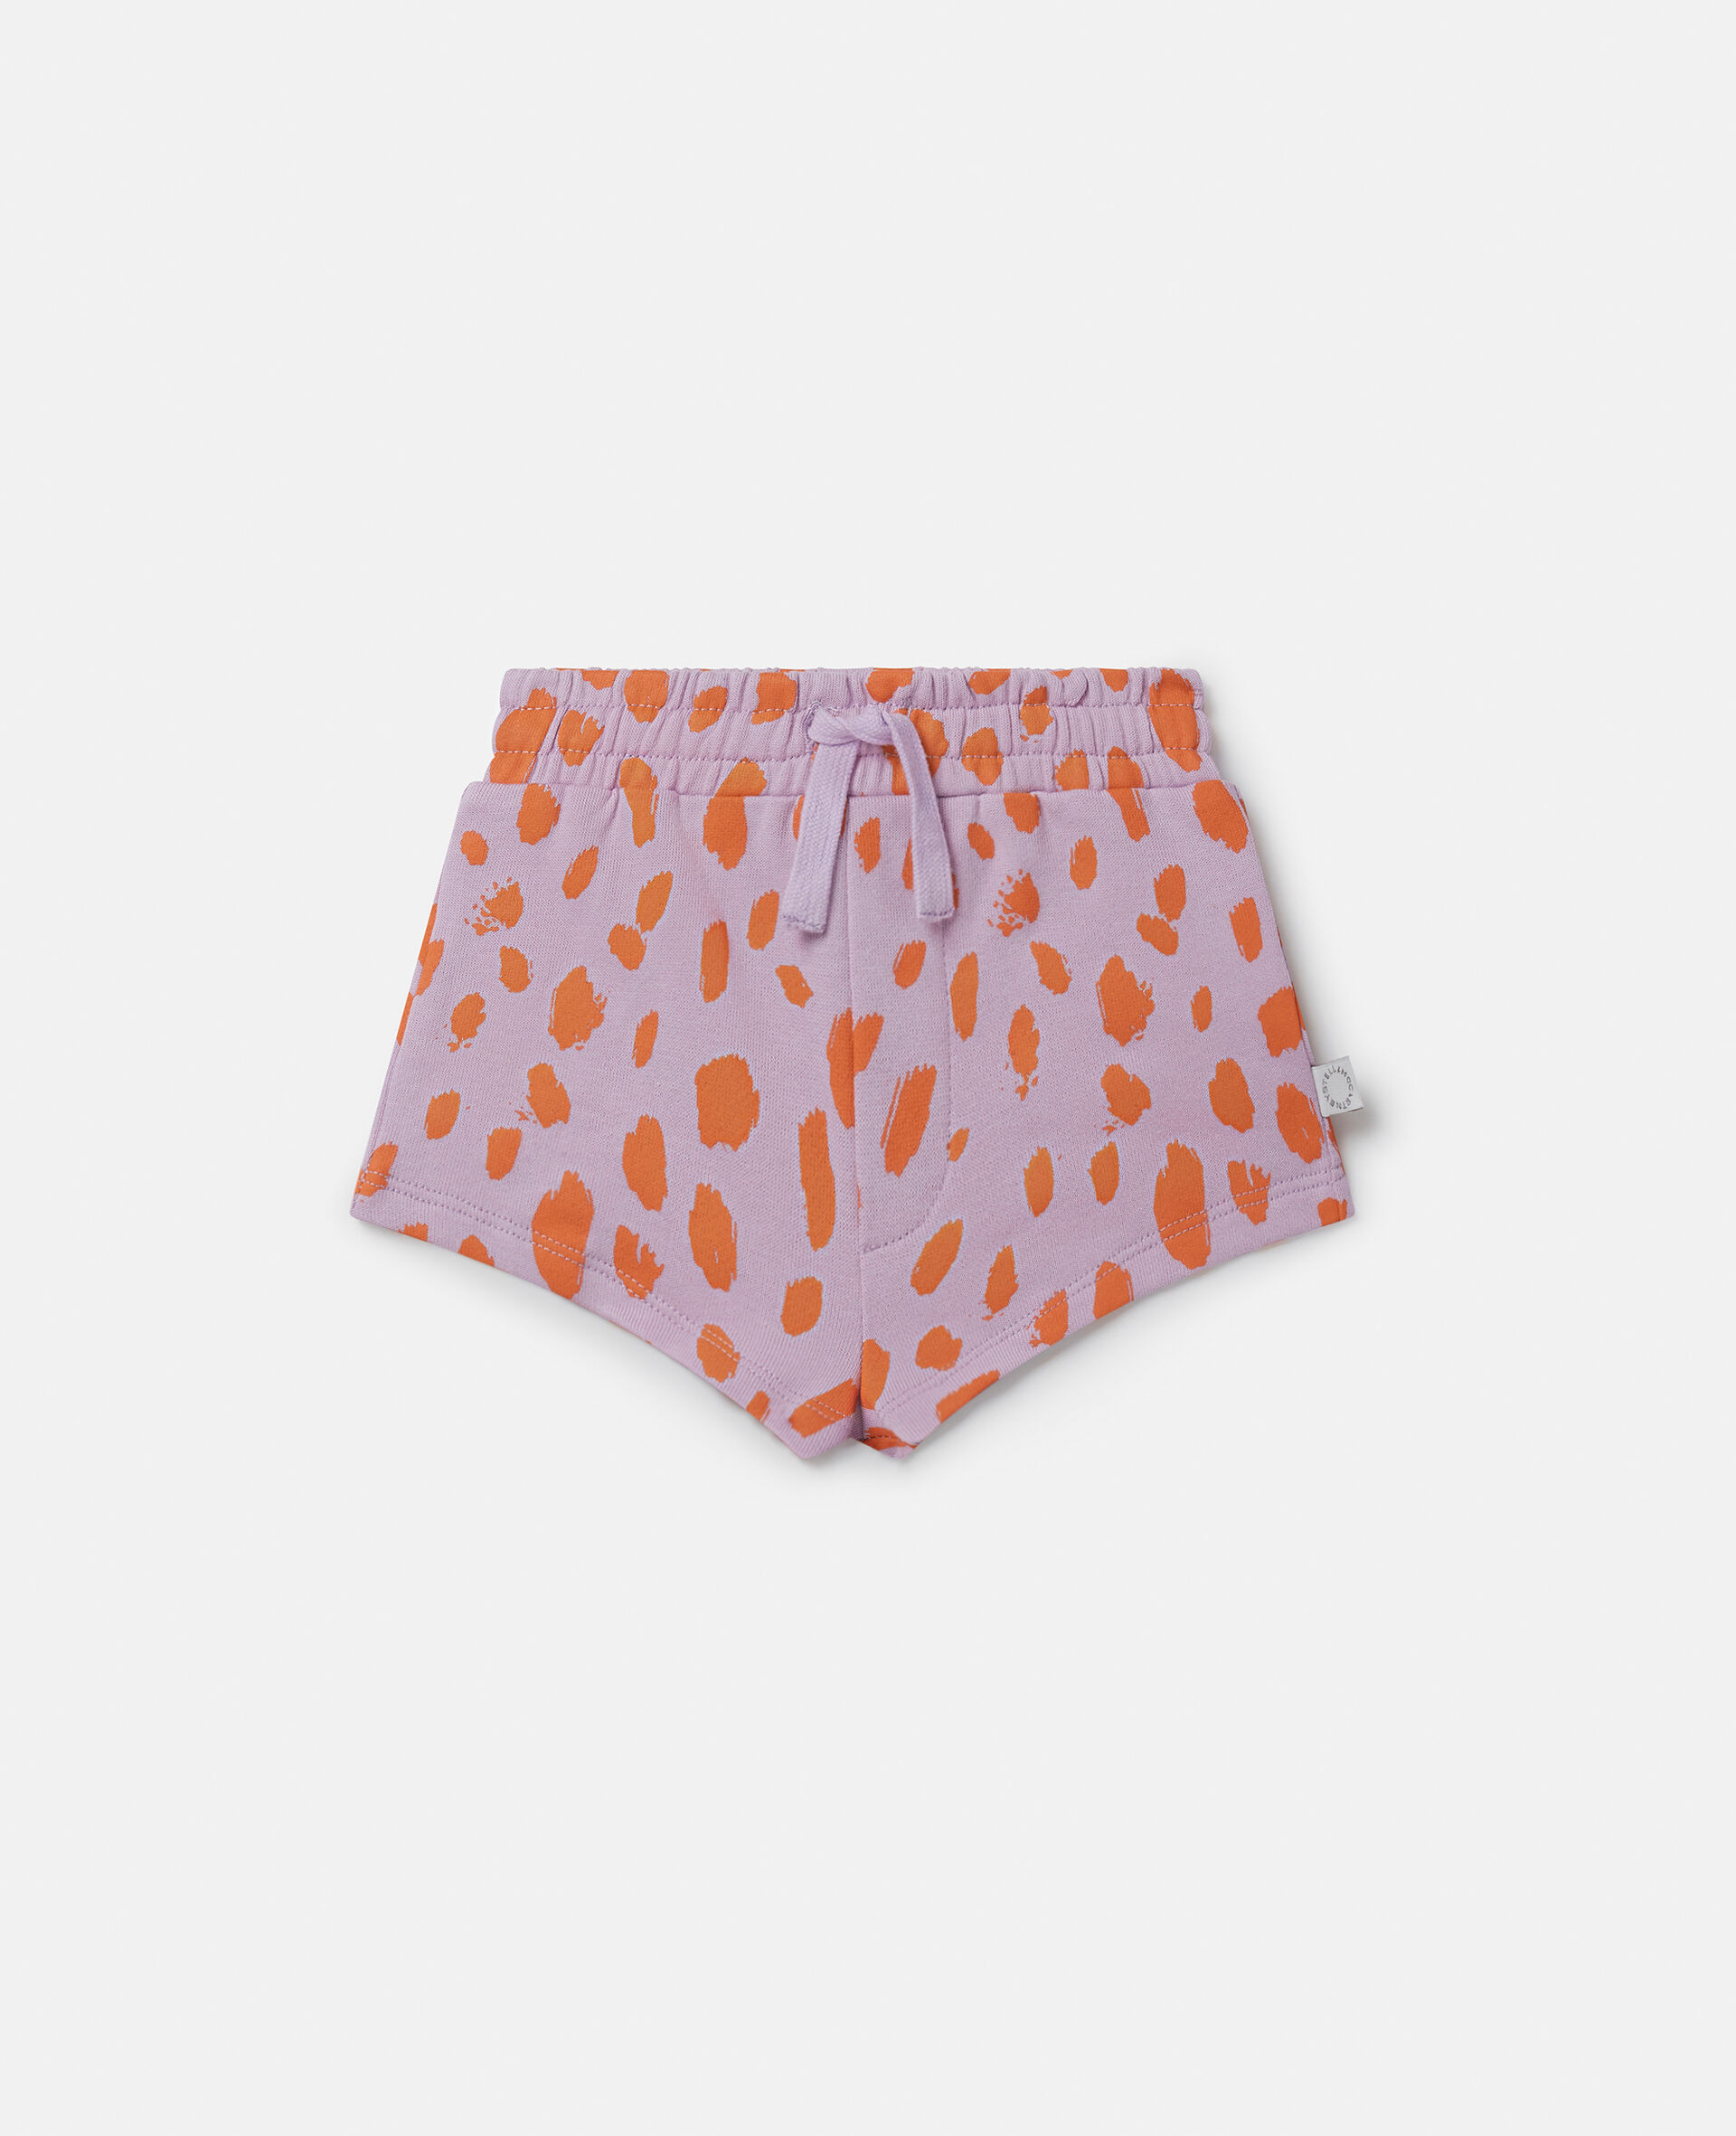 Neon Leopard Print Sweat Shorts-Red-large